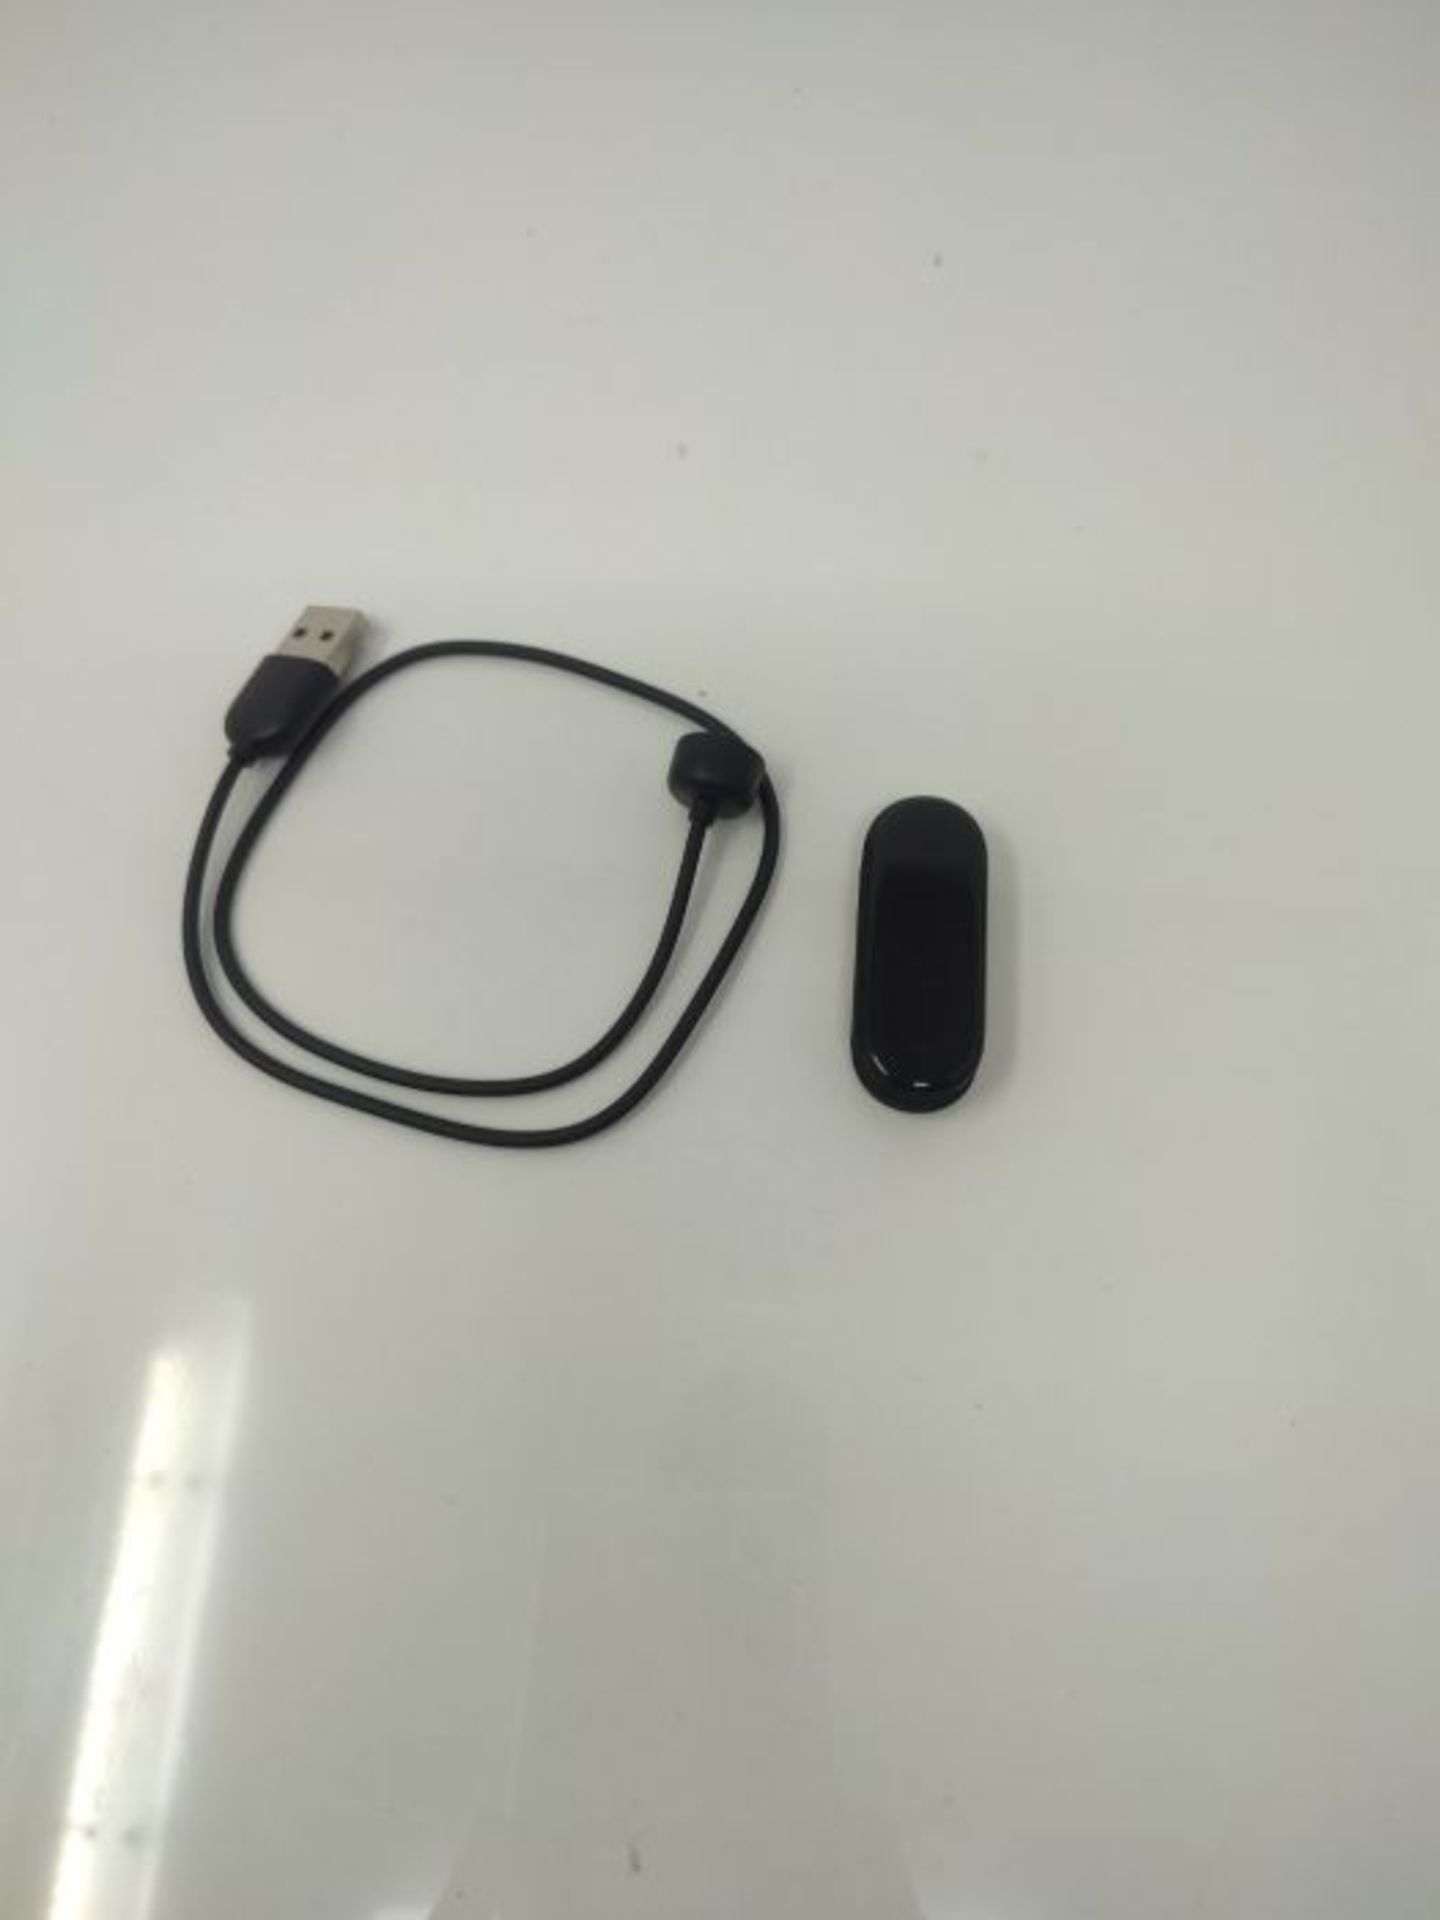 [INCOMPLETE] Xiaomi Mi Band 5, Smart Band Bracelet Magnetic Charge 1.1 " Touch Screen - Image 3 of 3